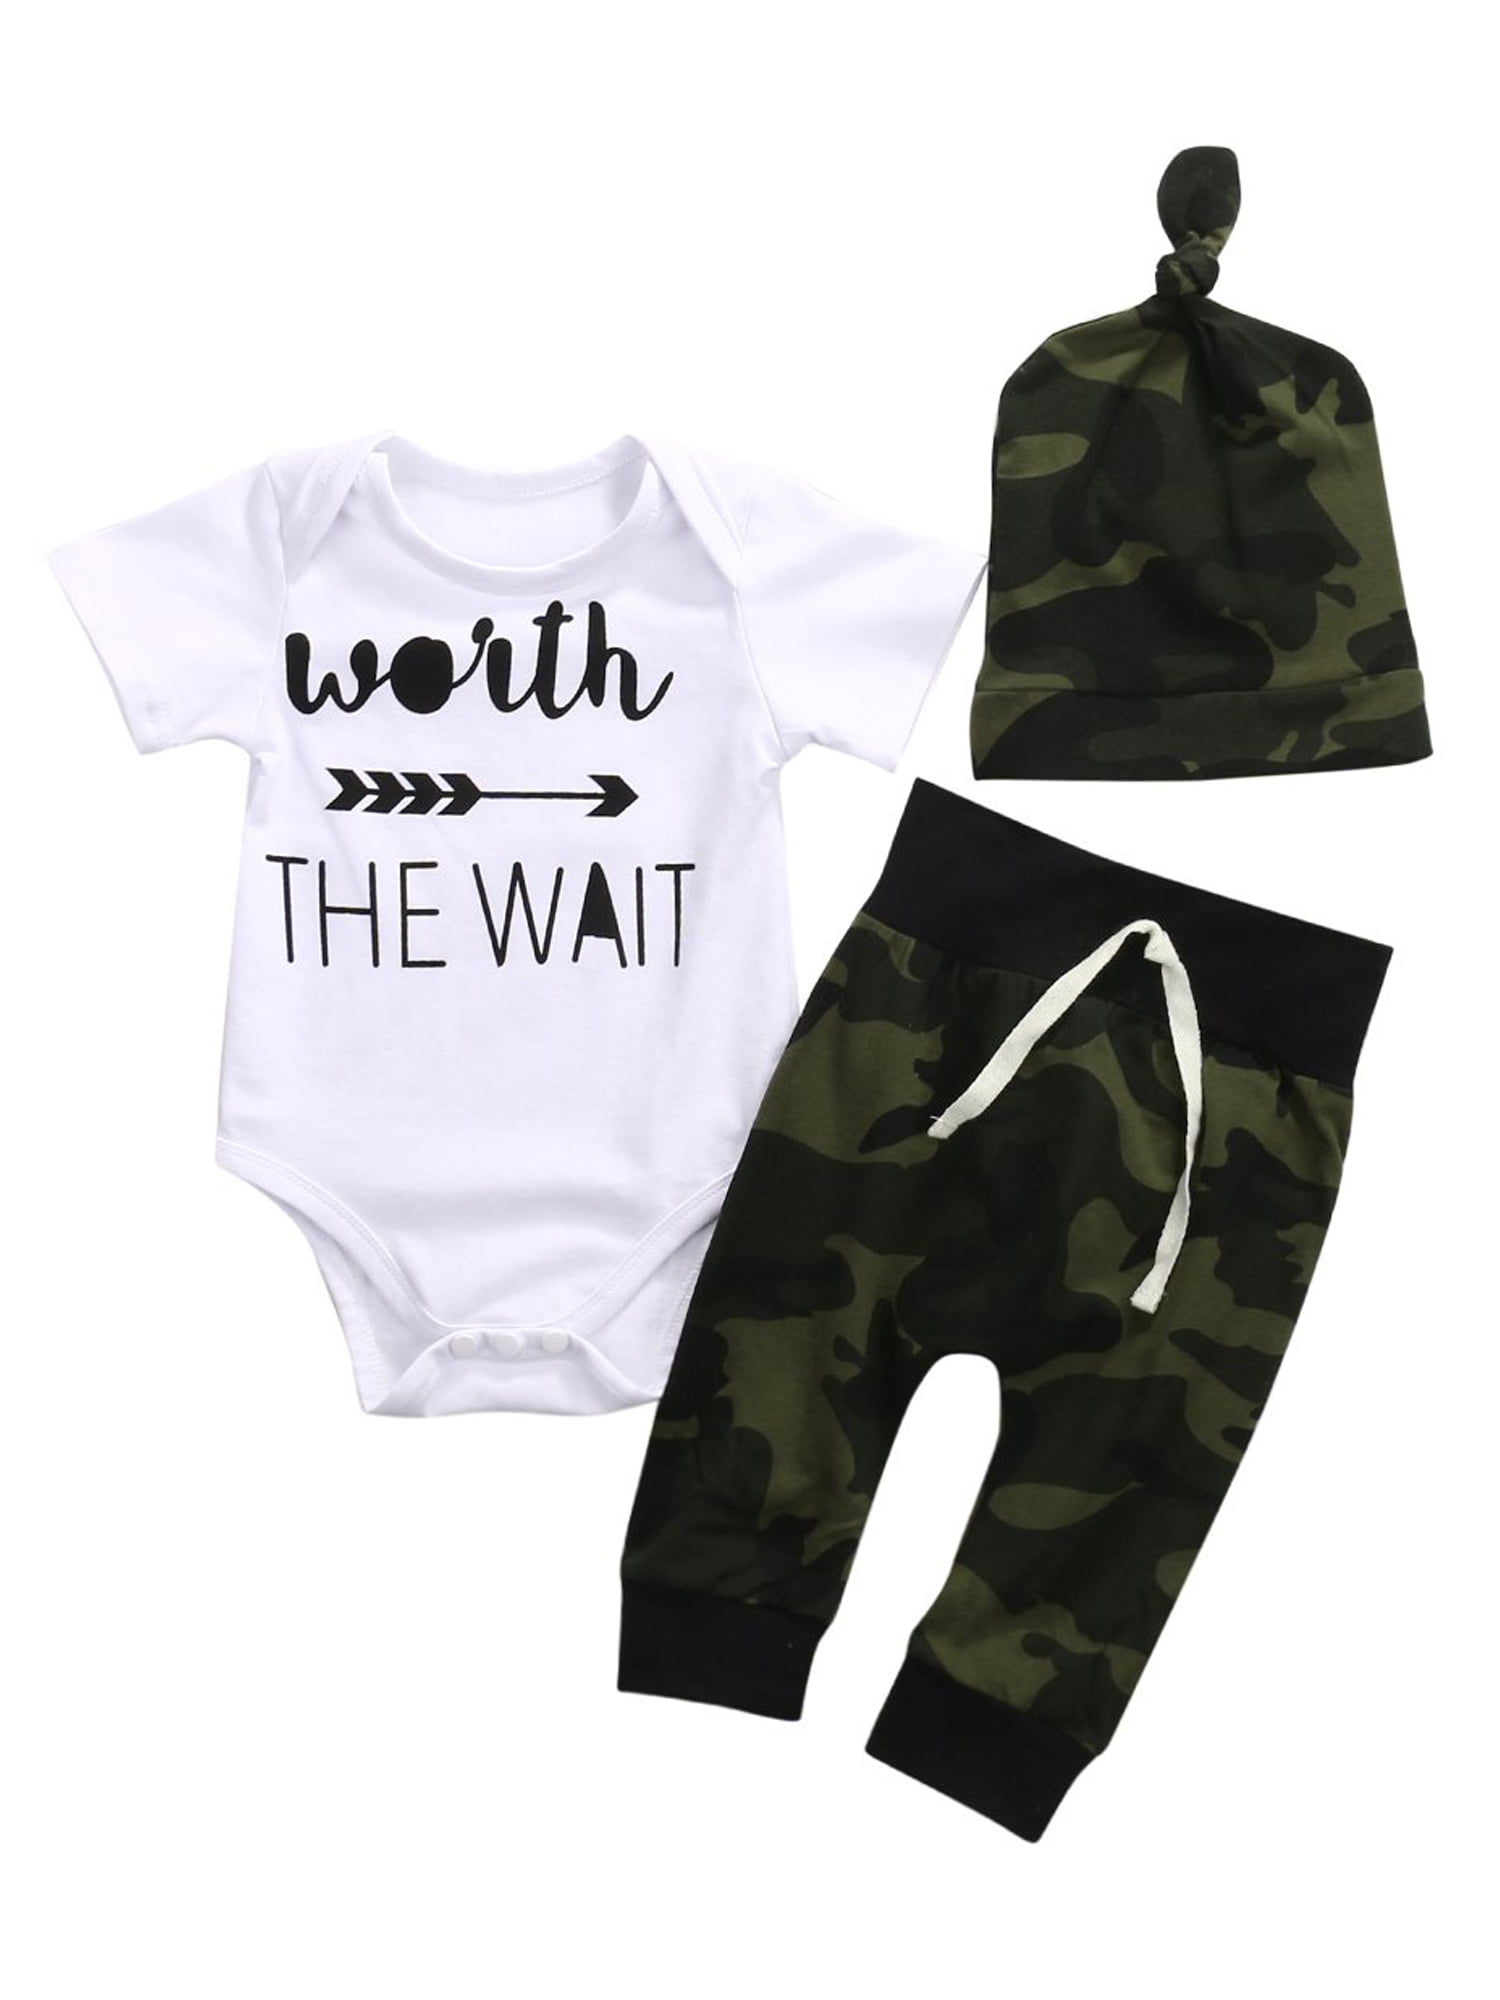 Worth The Wait Colors & Sizes Baby & Infant T-Shirts